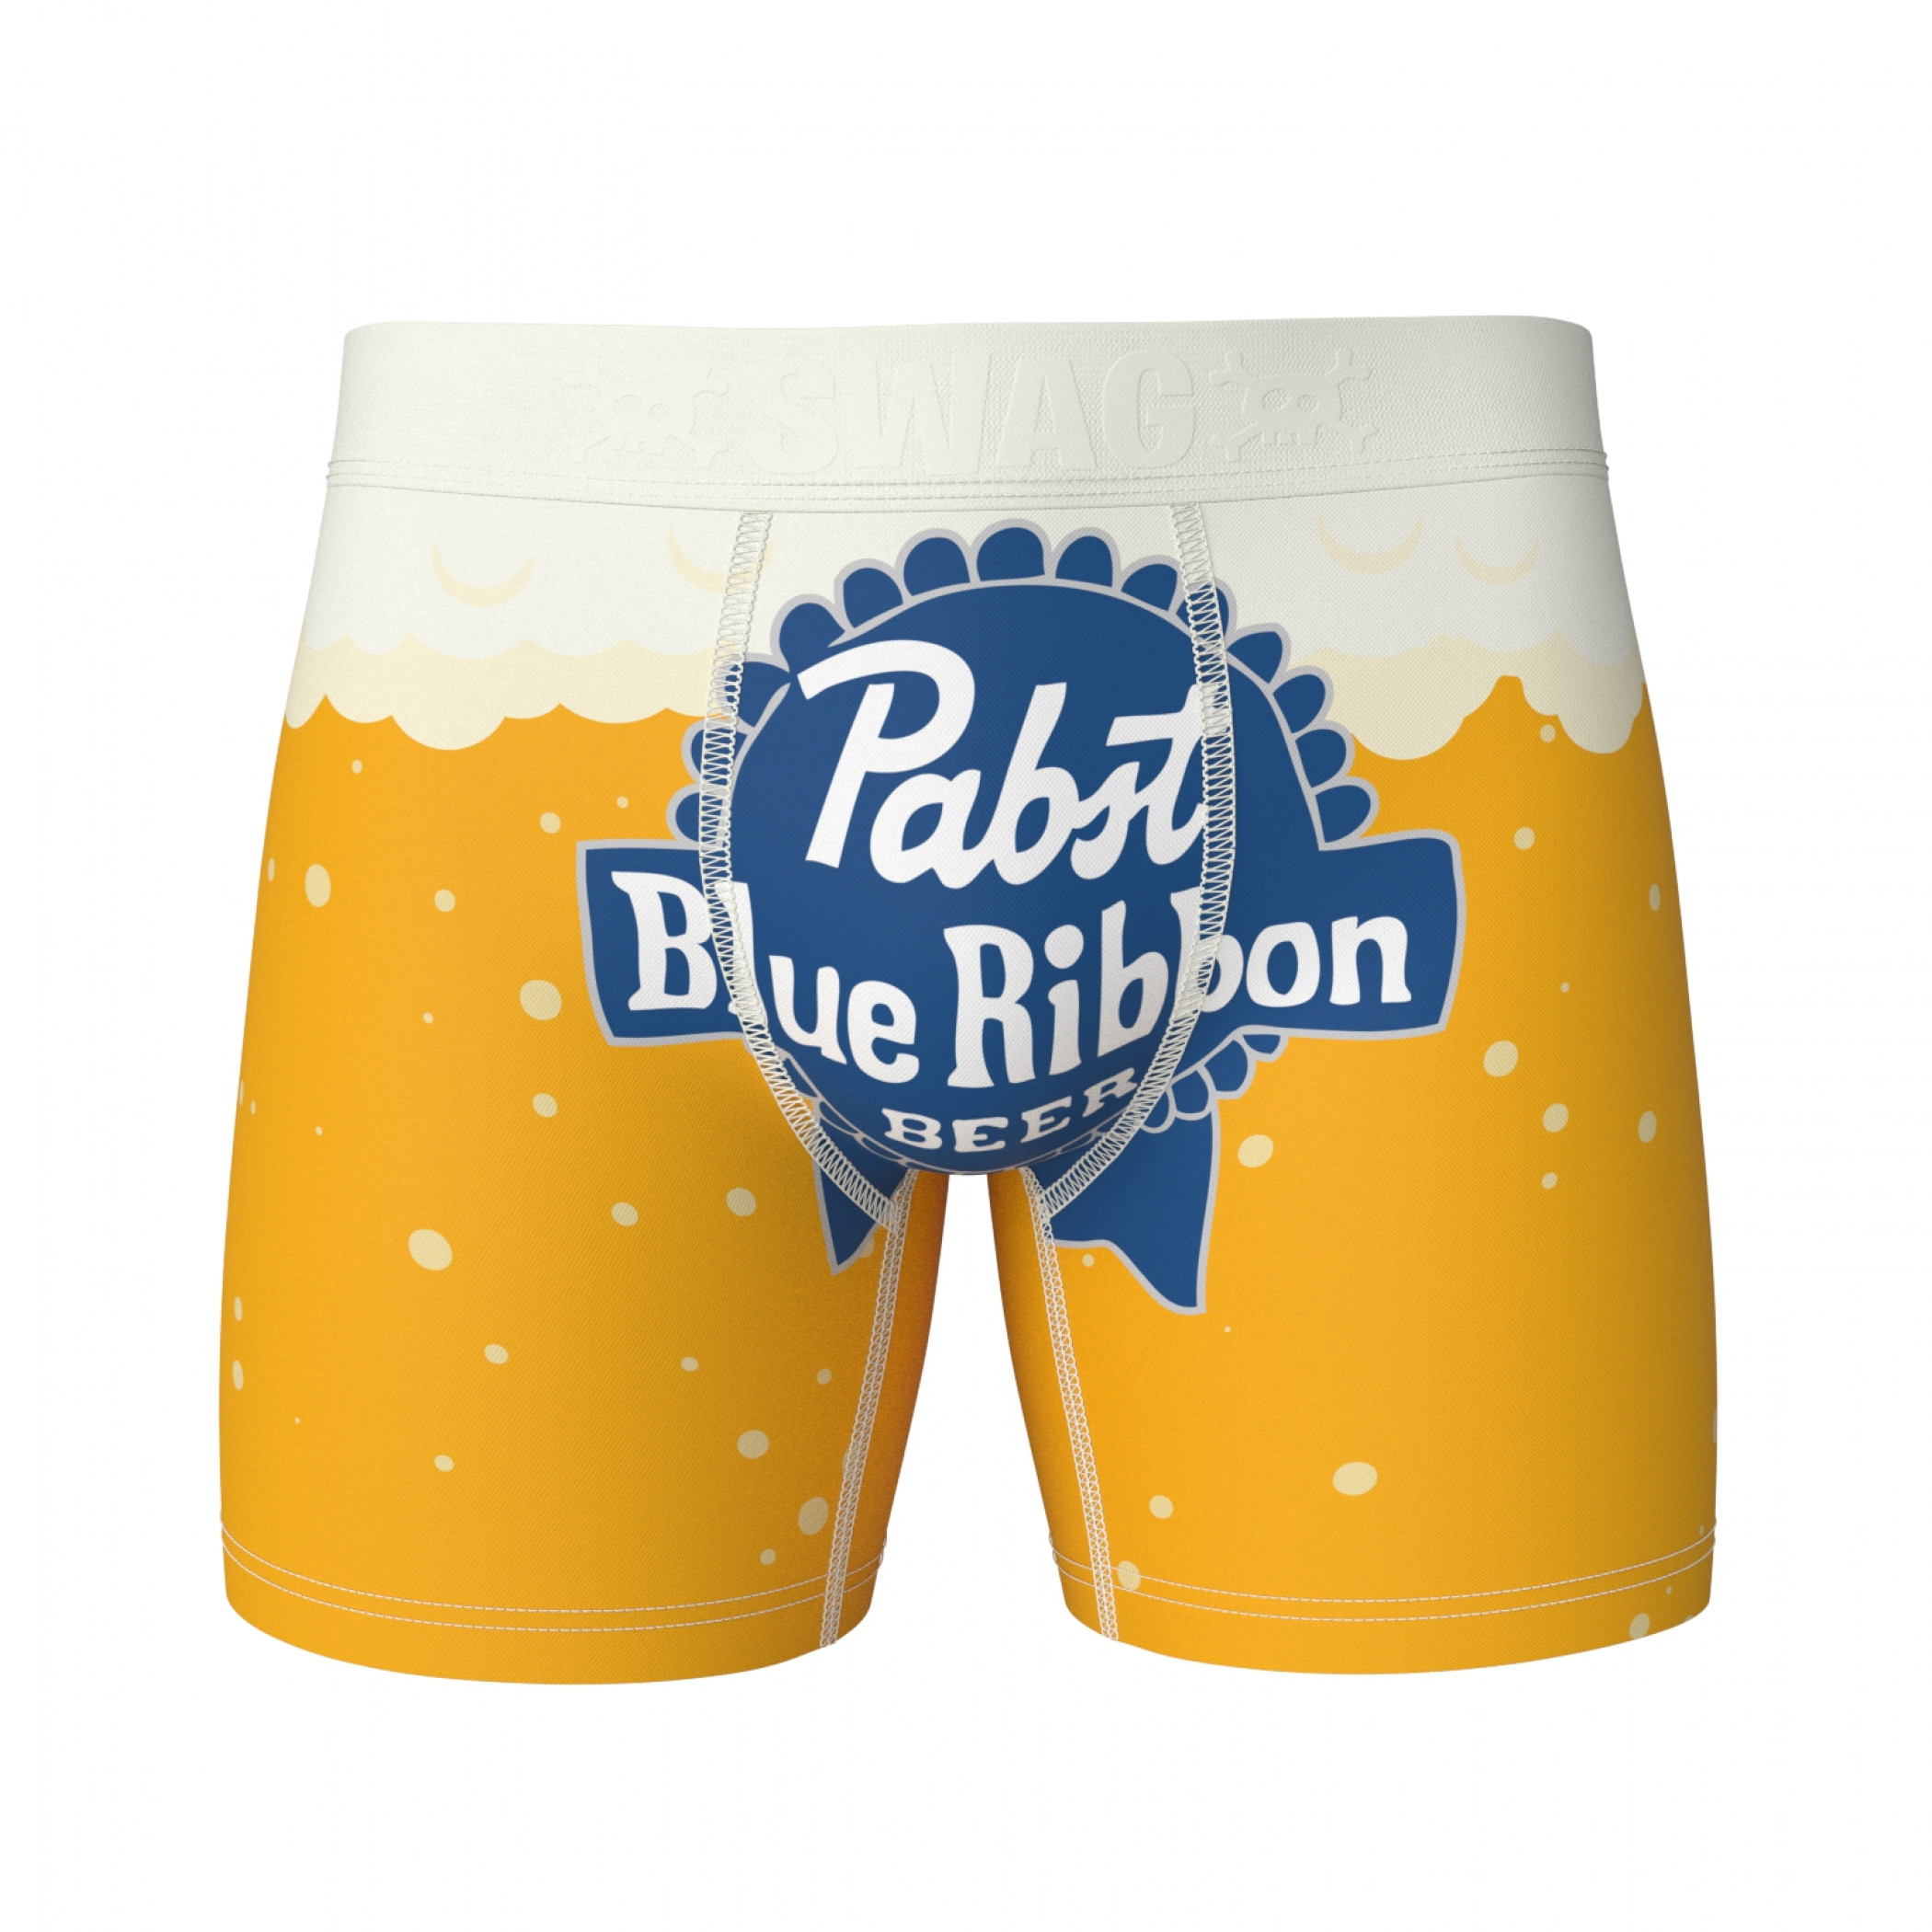 Pabst Blue Ribbon Beer Swag Boxer Briefs in a Can